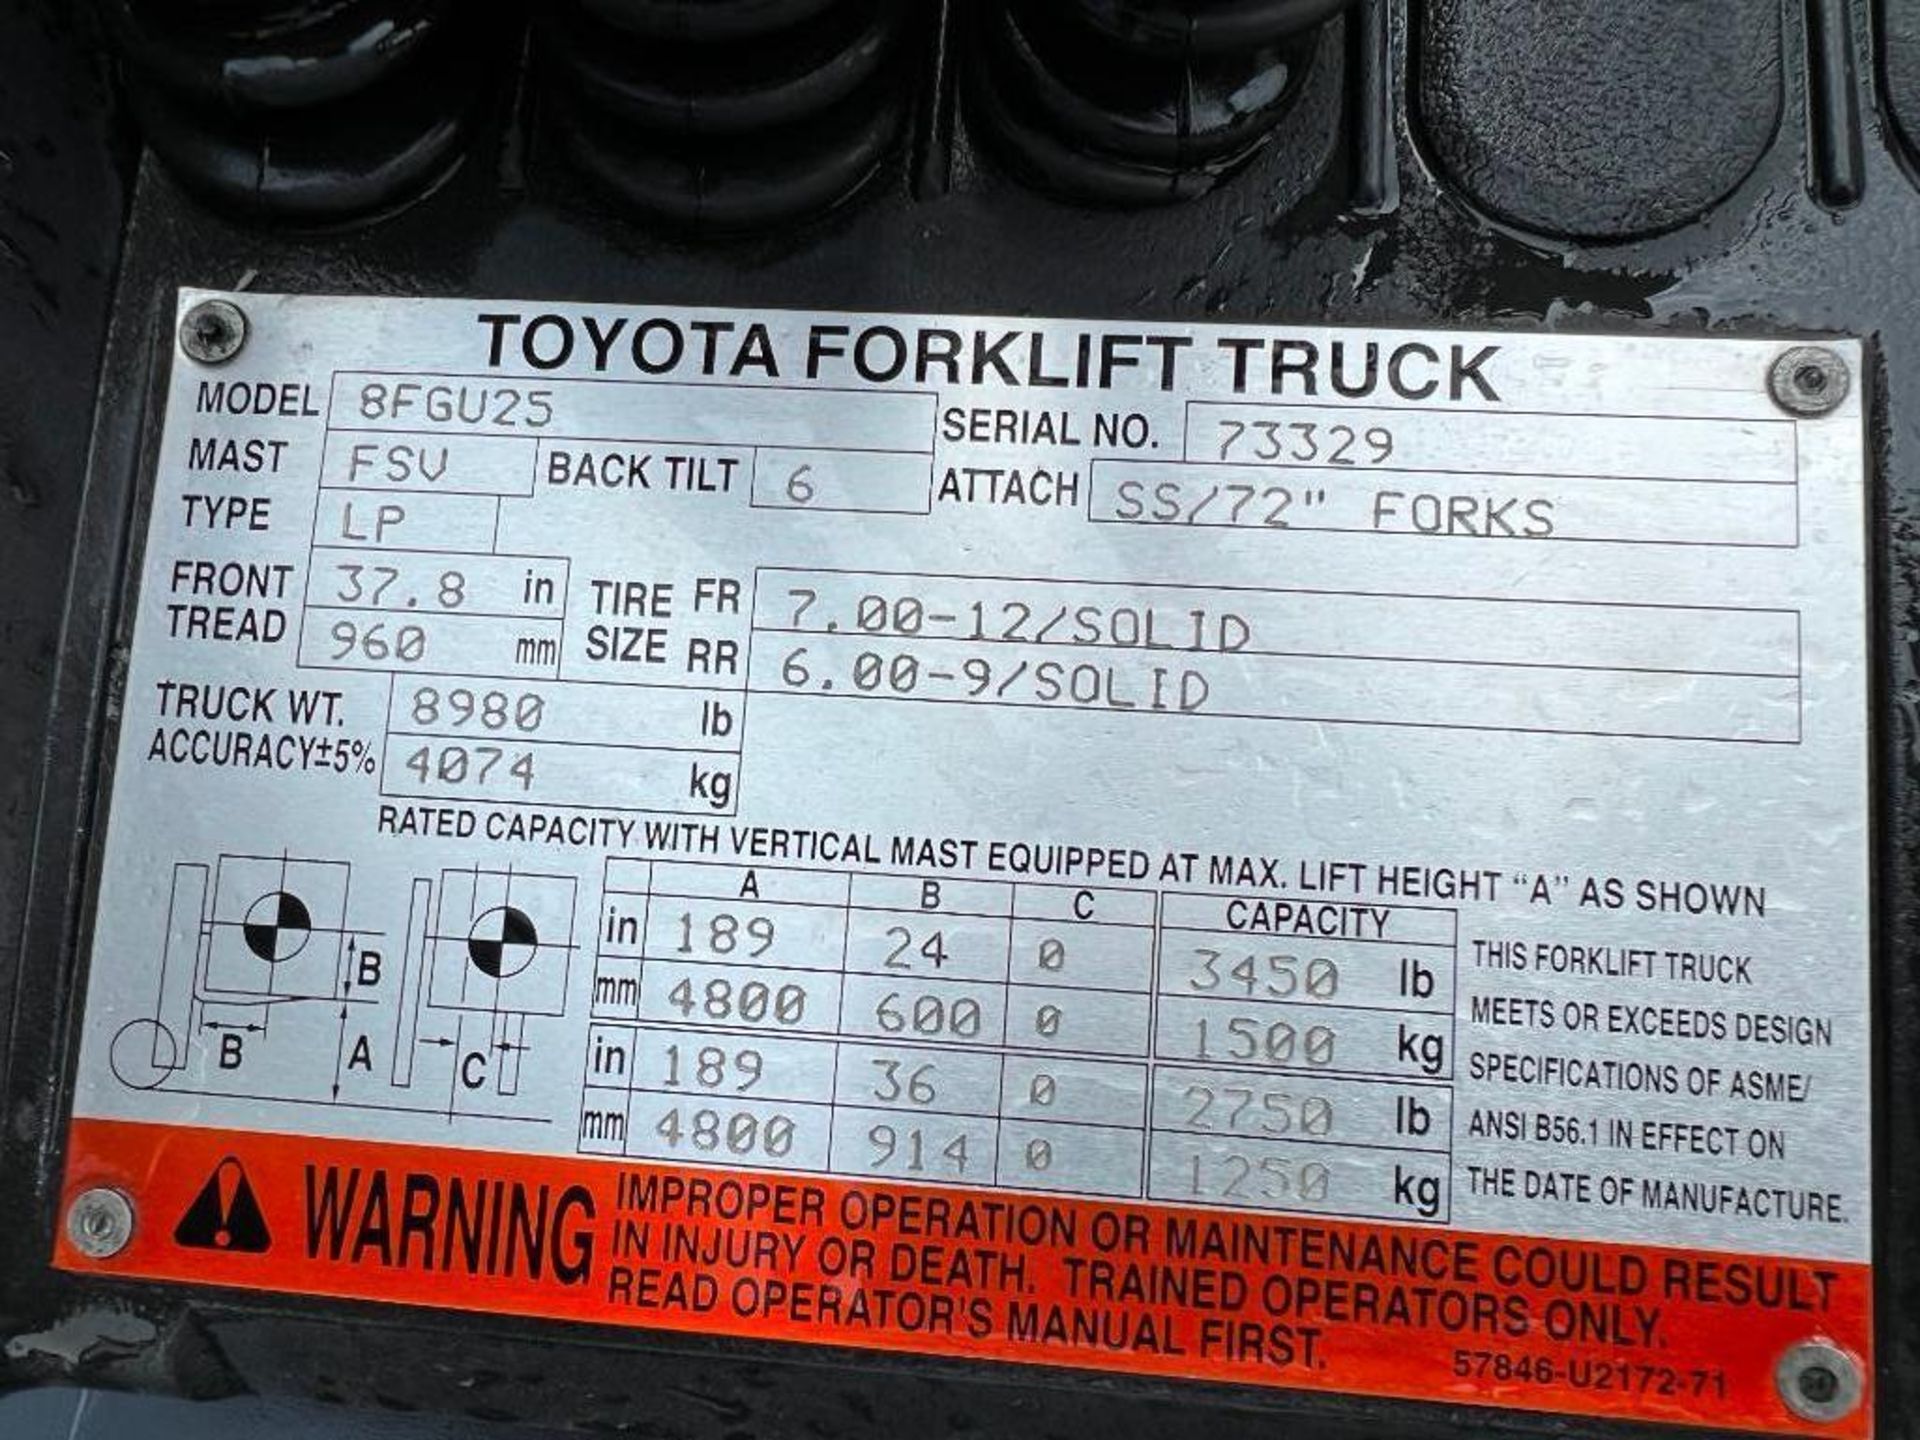 Toyota Forklift Truck, Model 8FGU25, Hours 5,264, LP. Located in Altamont, IL - Image 7 of 19